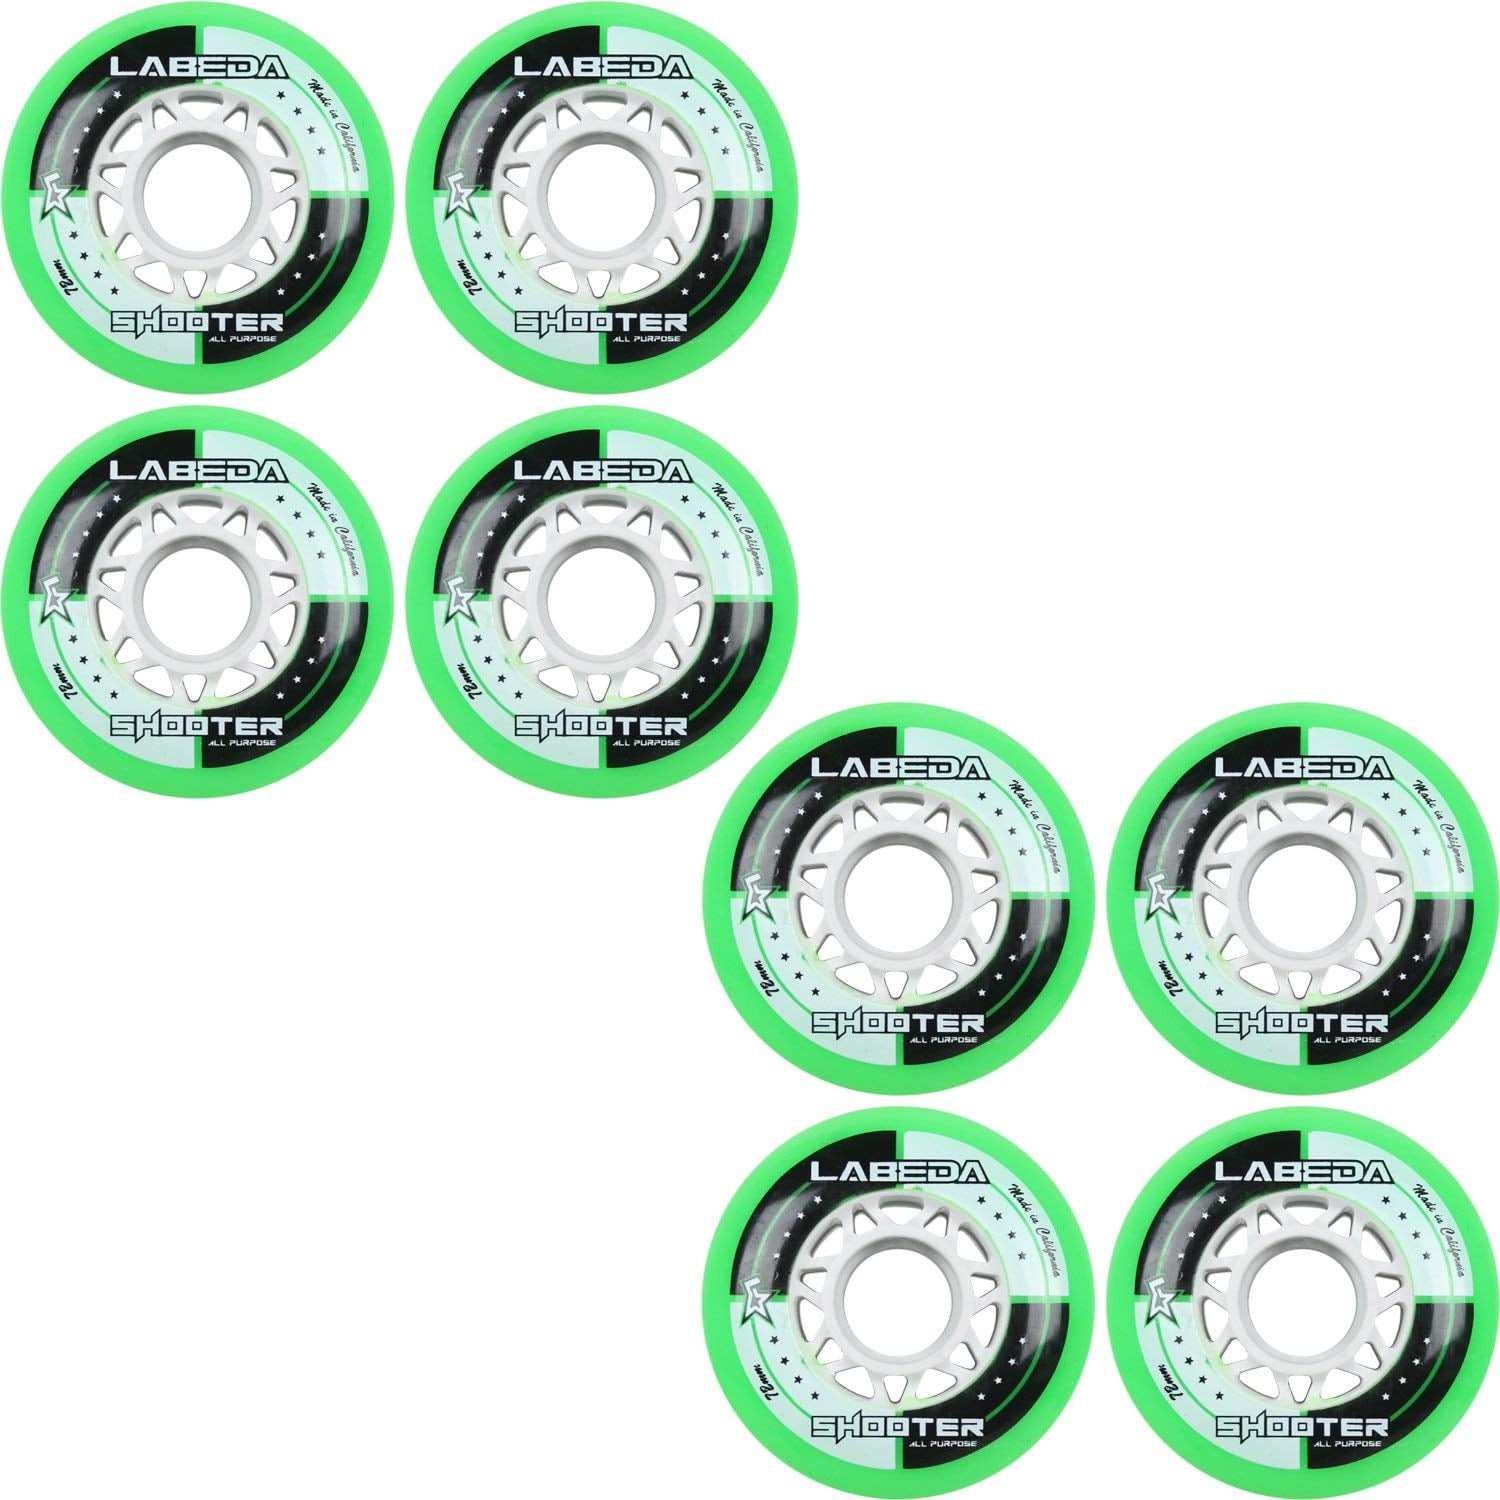 Labeda Shooter All Purpose Inline Hockey Roller Skate Wheels 4 or 8 Pack 